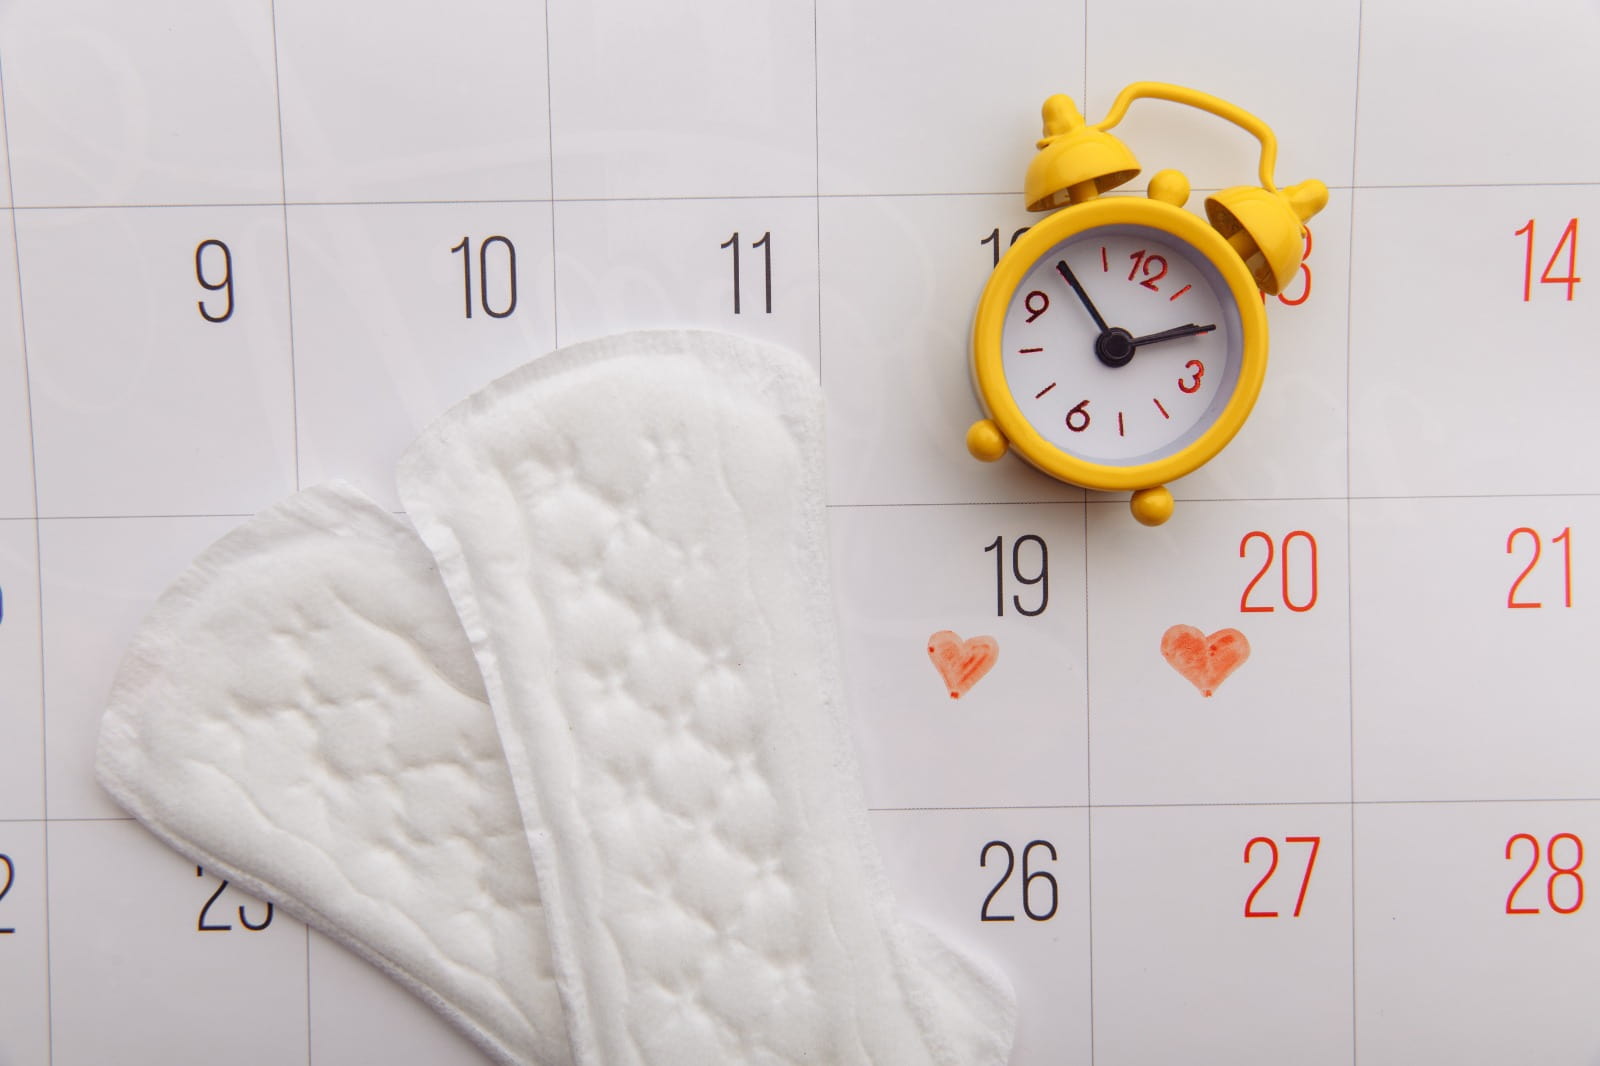 Period delay tablets can help you temporarily skip your period